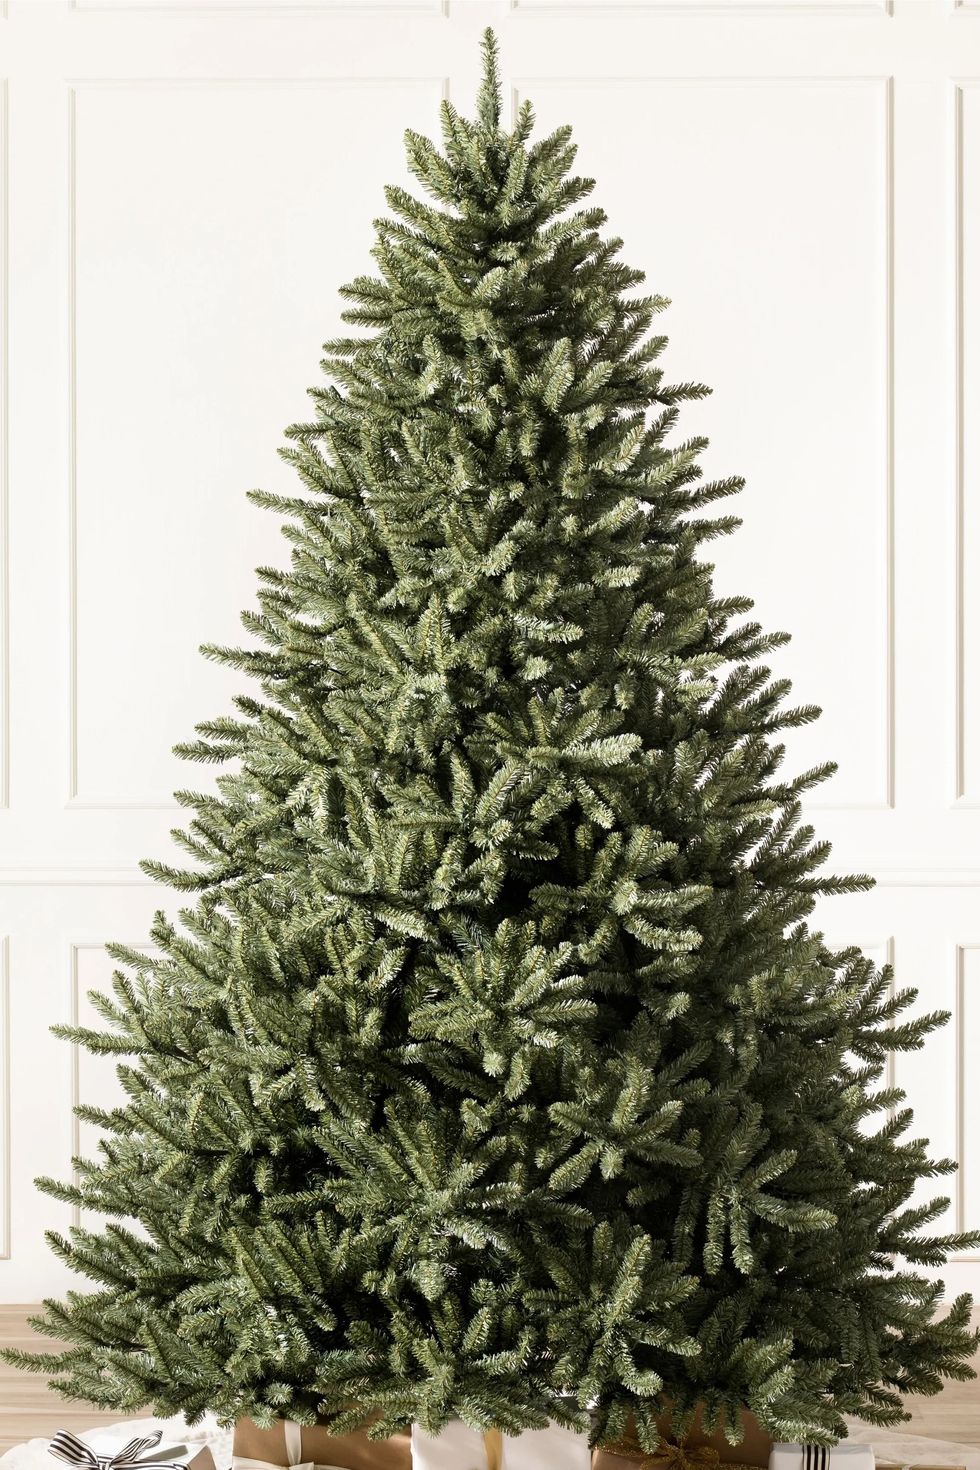 Lighted Flocked Artificial Christmas Tree - Includes A Tree Storage Bag and Remote Control The Holiday Aisle Size: 7.5